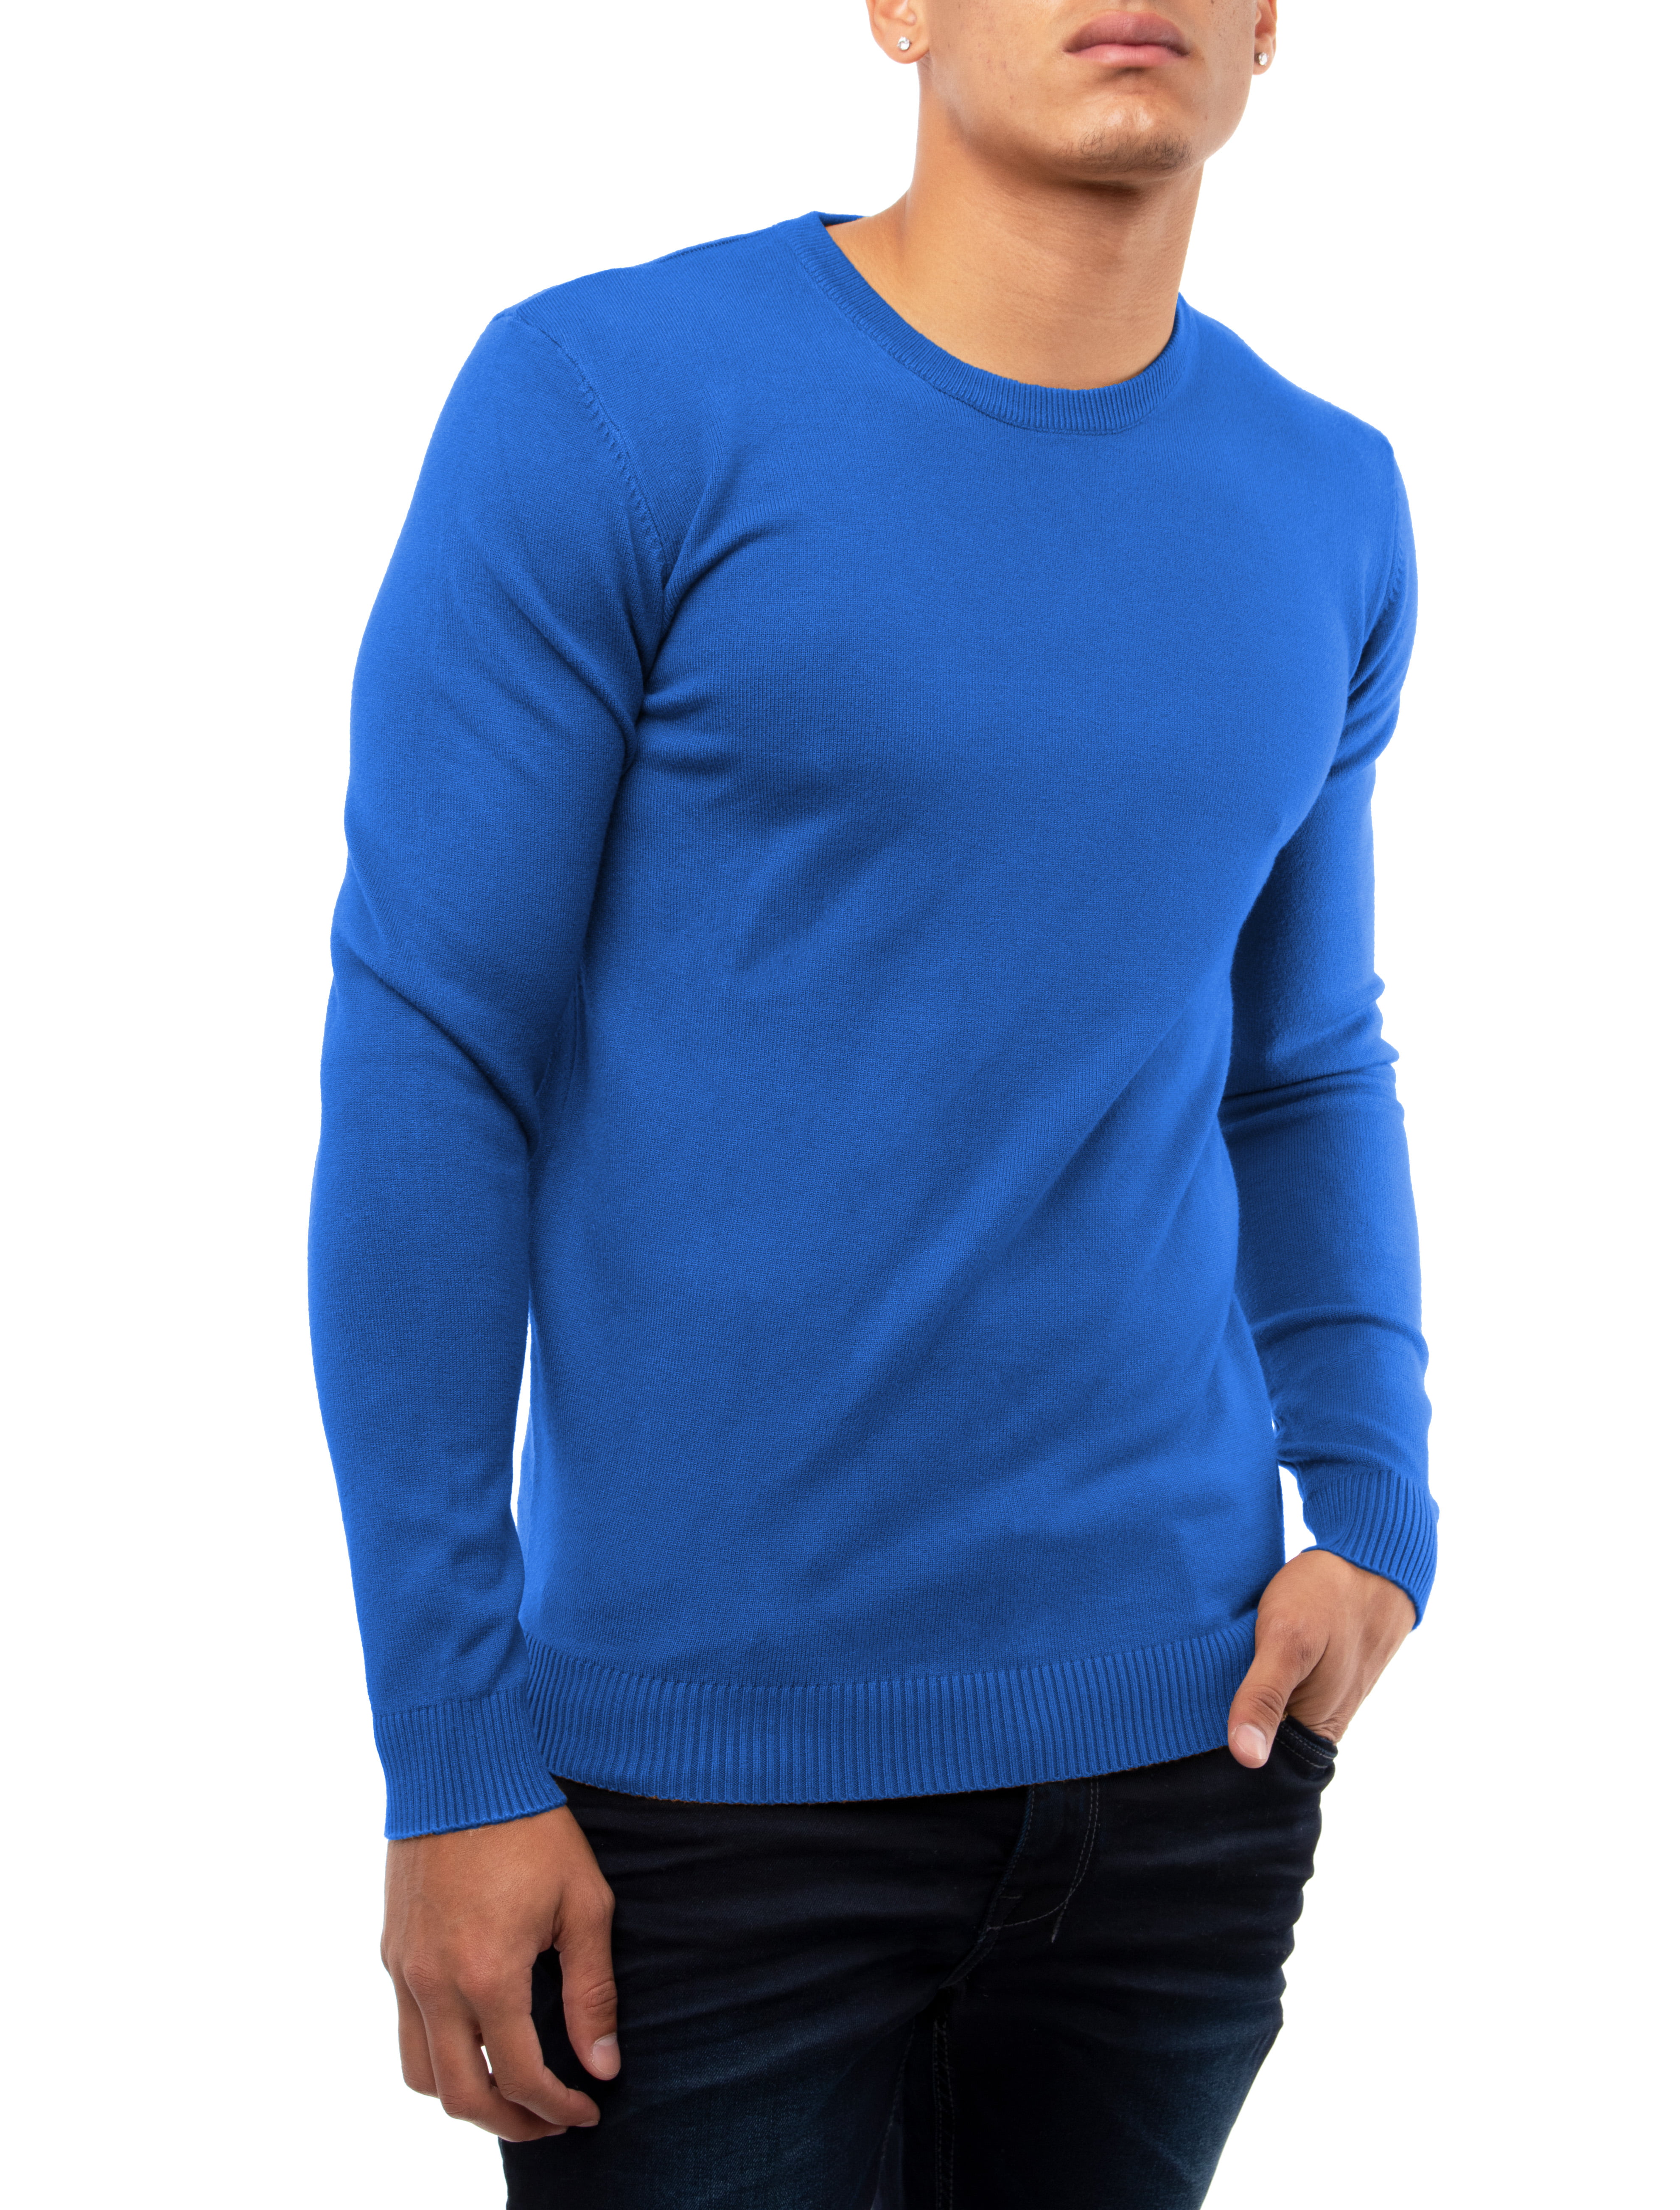 XRAY Crewneck Sweater for Men Slim Fit Ultra Soft Fitted Fashion Pullover Mens Sweater for Casual Or Dressy Wear